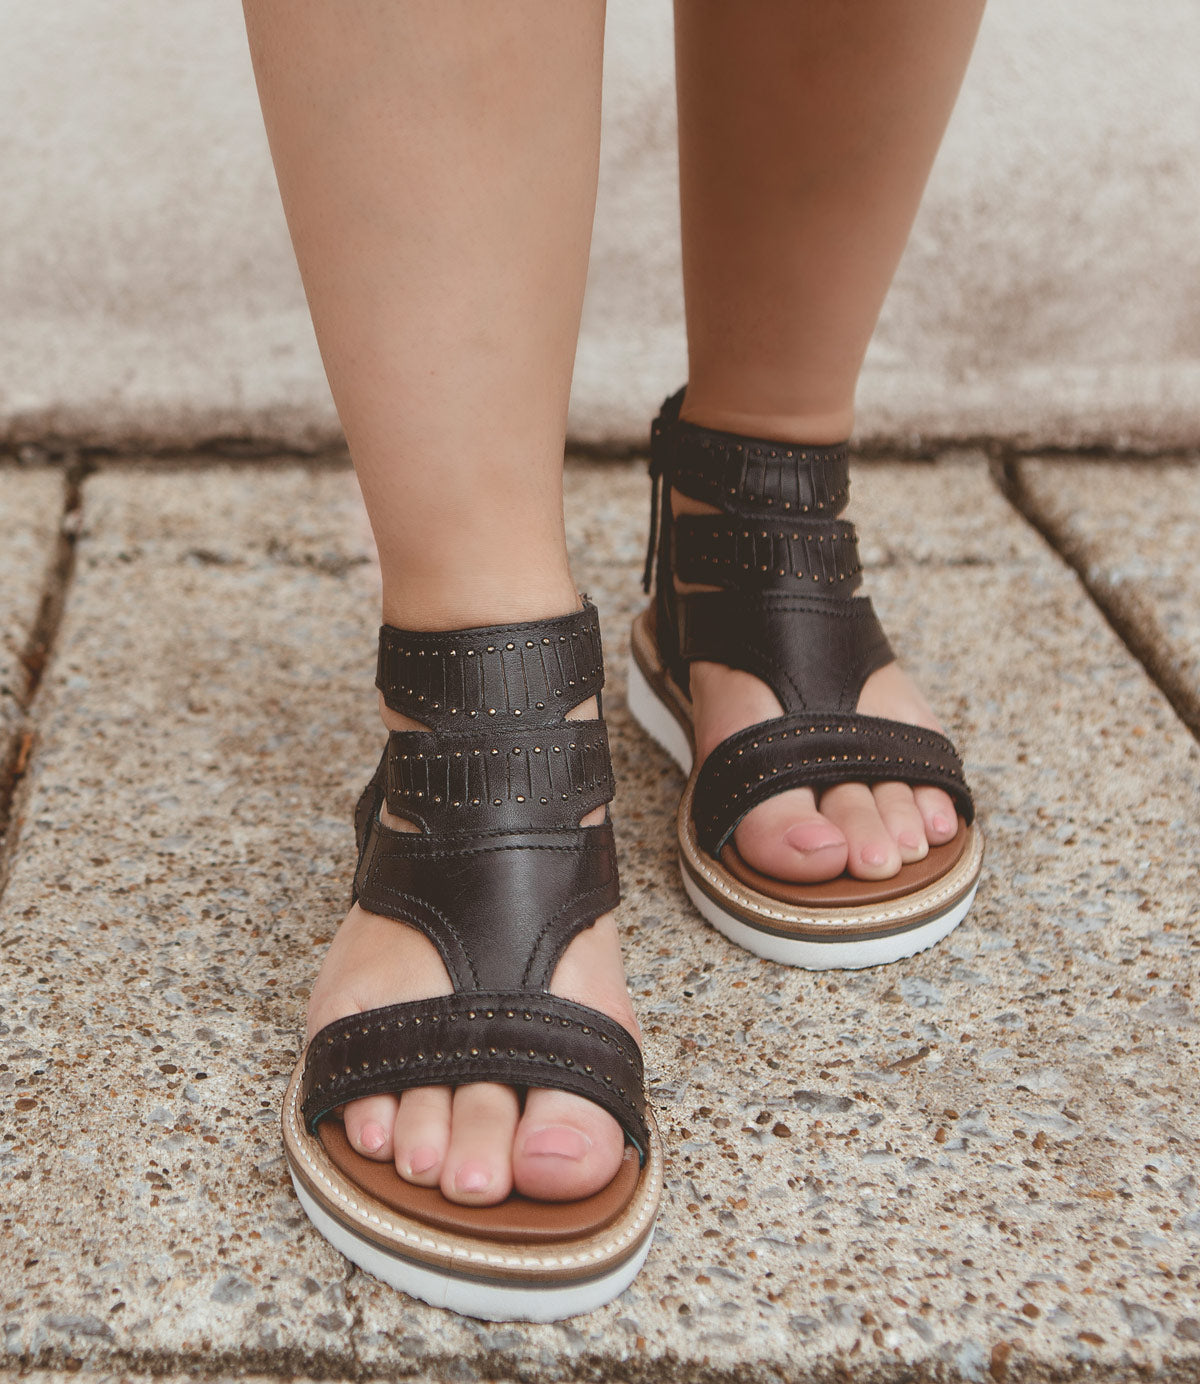 
                  
                    A person wearing Roan Carlita II black strappy sandals with white soles, standing on a concrete surface, enjoys cushioned comfort.
                  
                